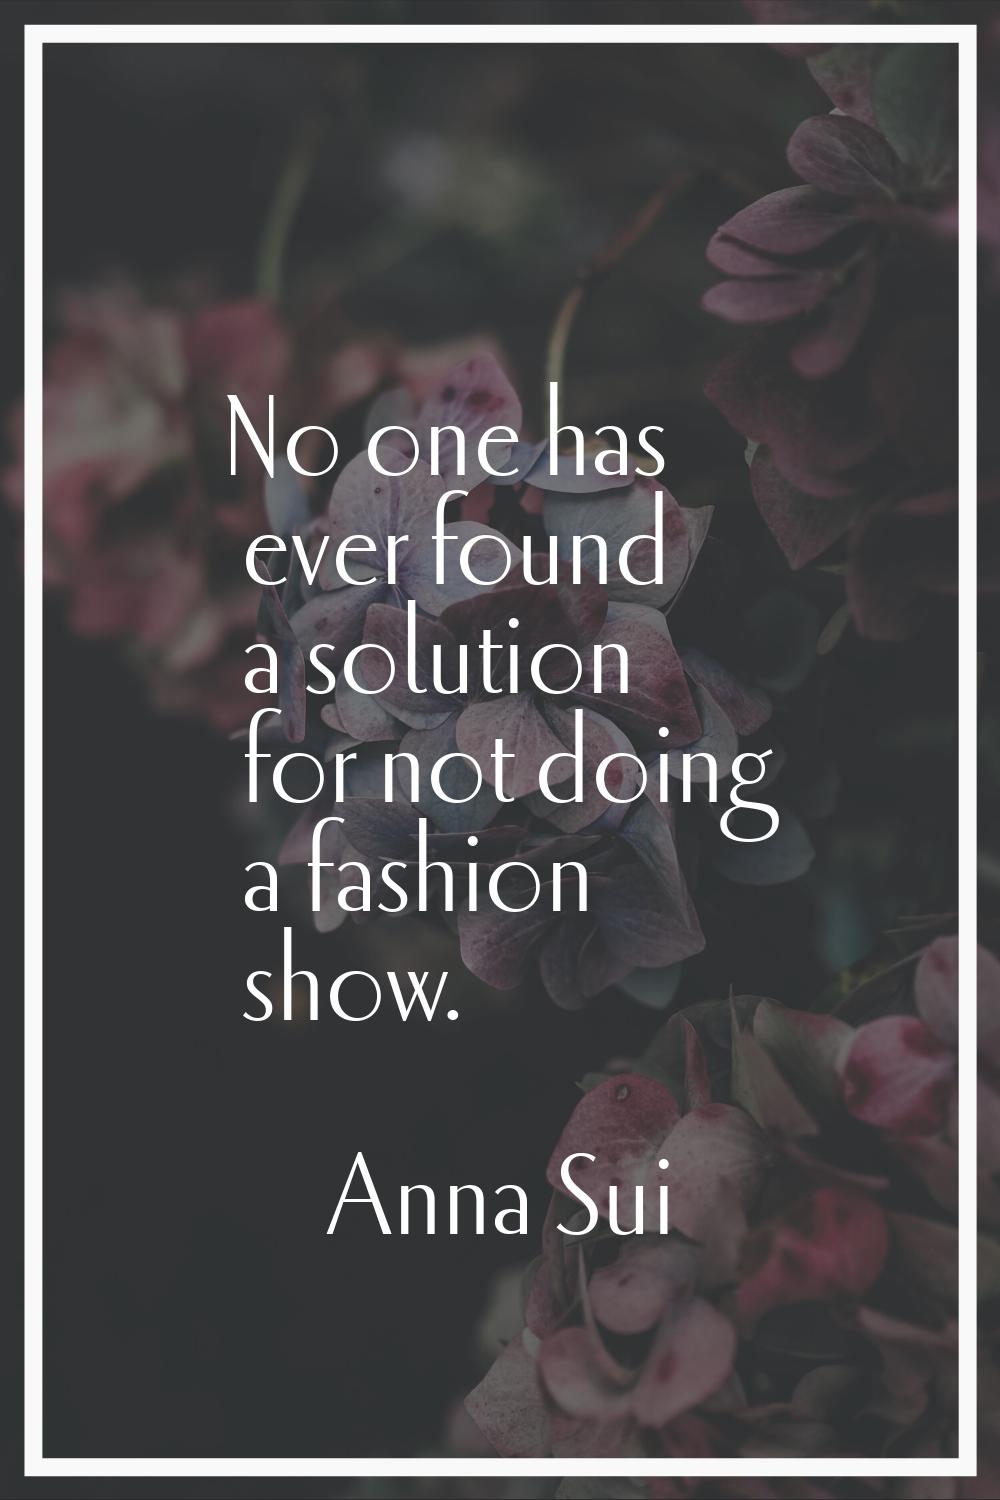 No one has ever found a solution for not doing a fashion show.